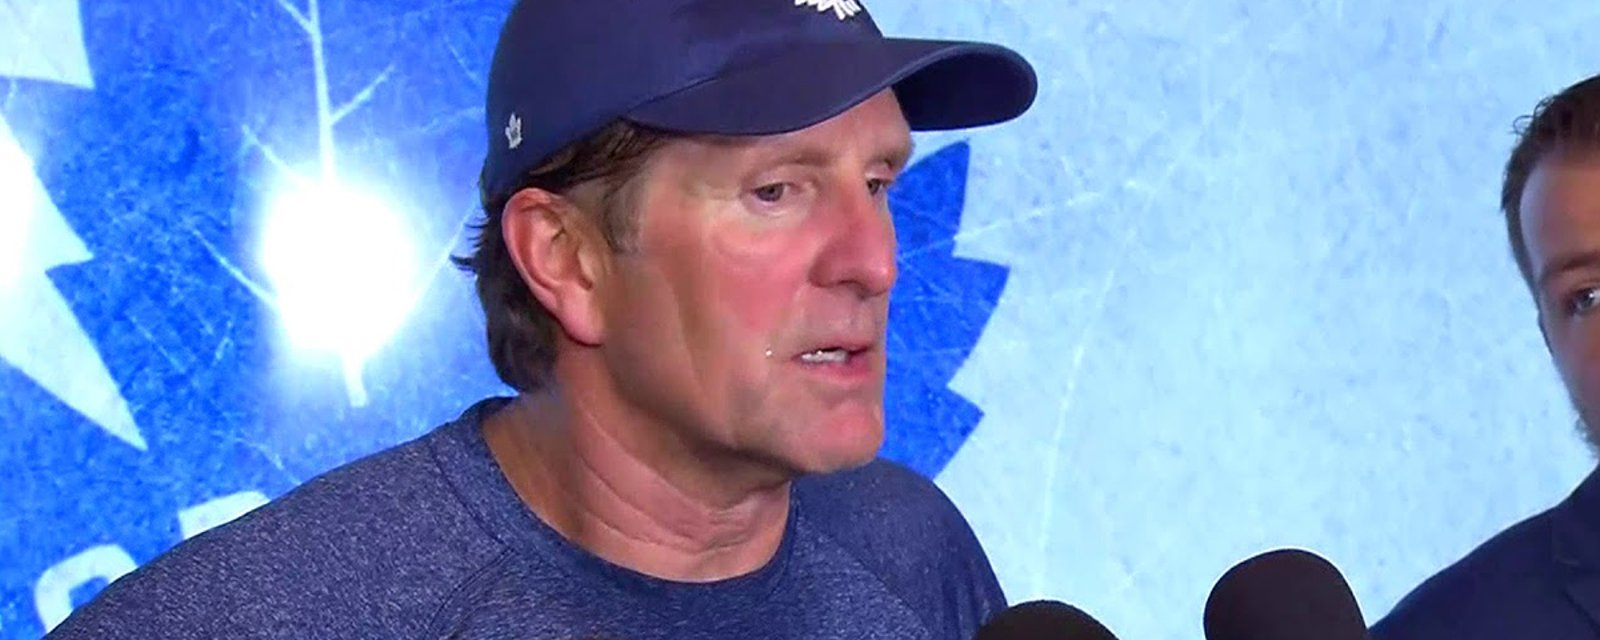 Babcock shares his secret to success: stealing.